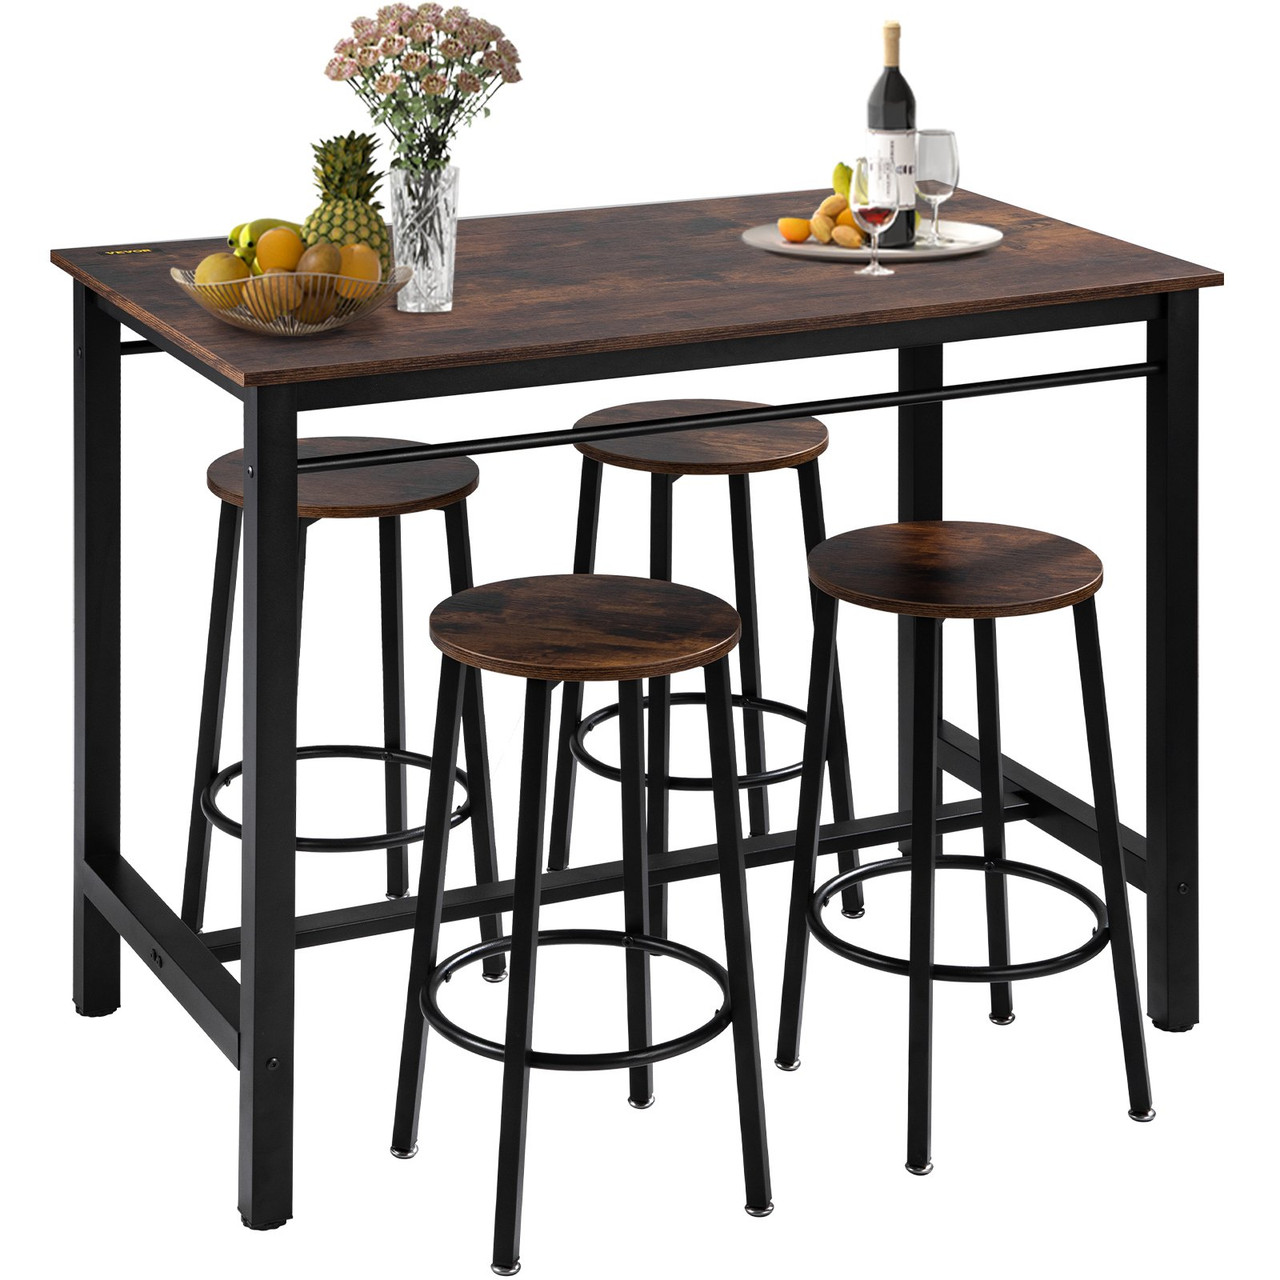 Bar Table and Chairs Set 43" Pub Table Set with 4 Bar Stools Kitchen Dining Table and Chairs Set for 4 Iron Frame Counter Height Dining Sets for Home, Kitchen, Living Room